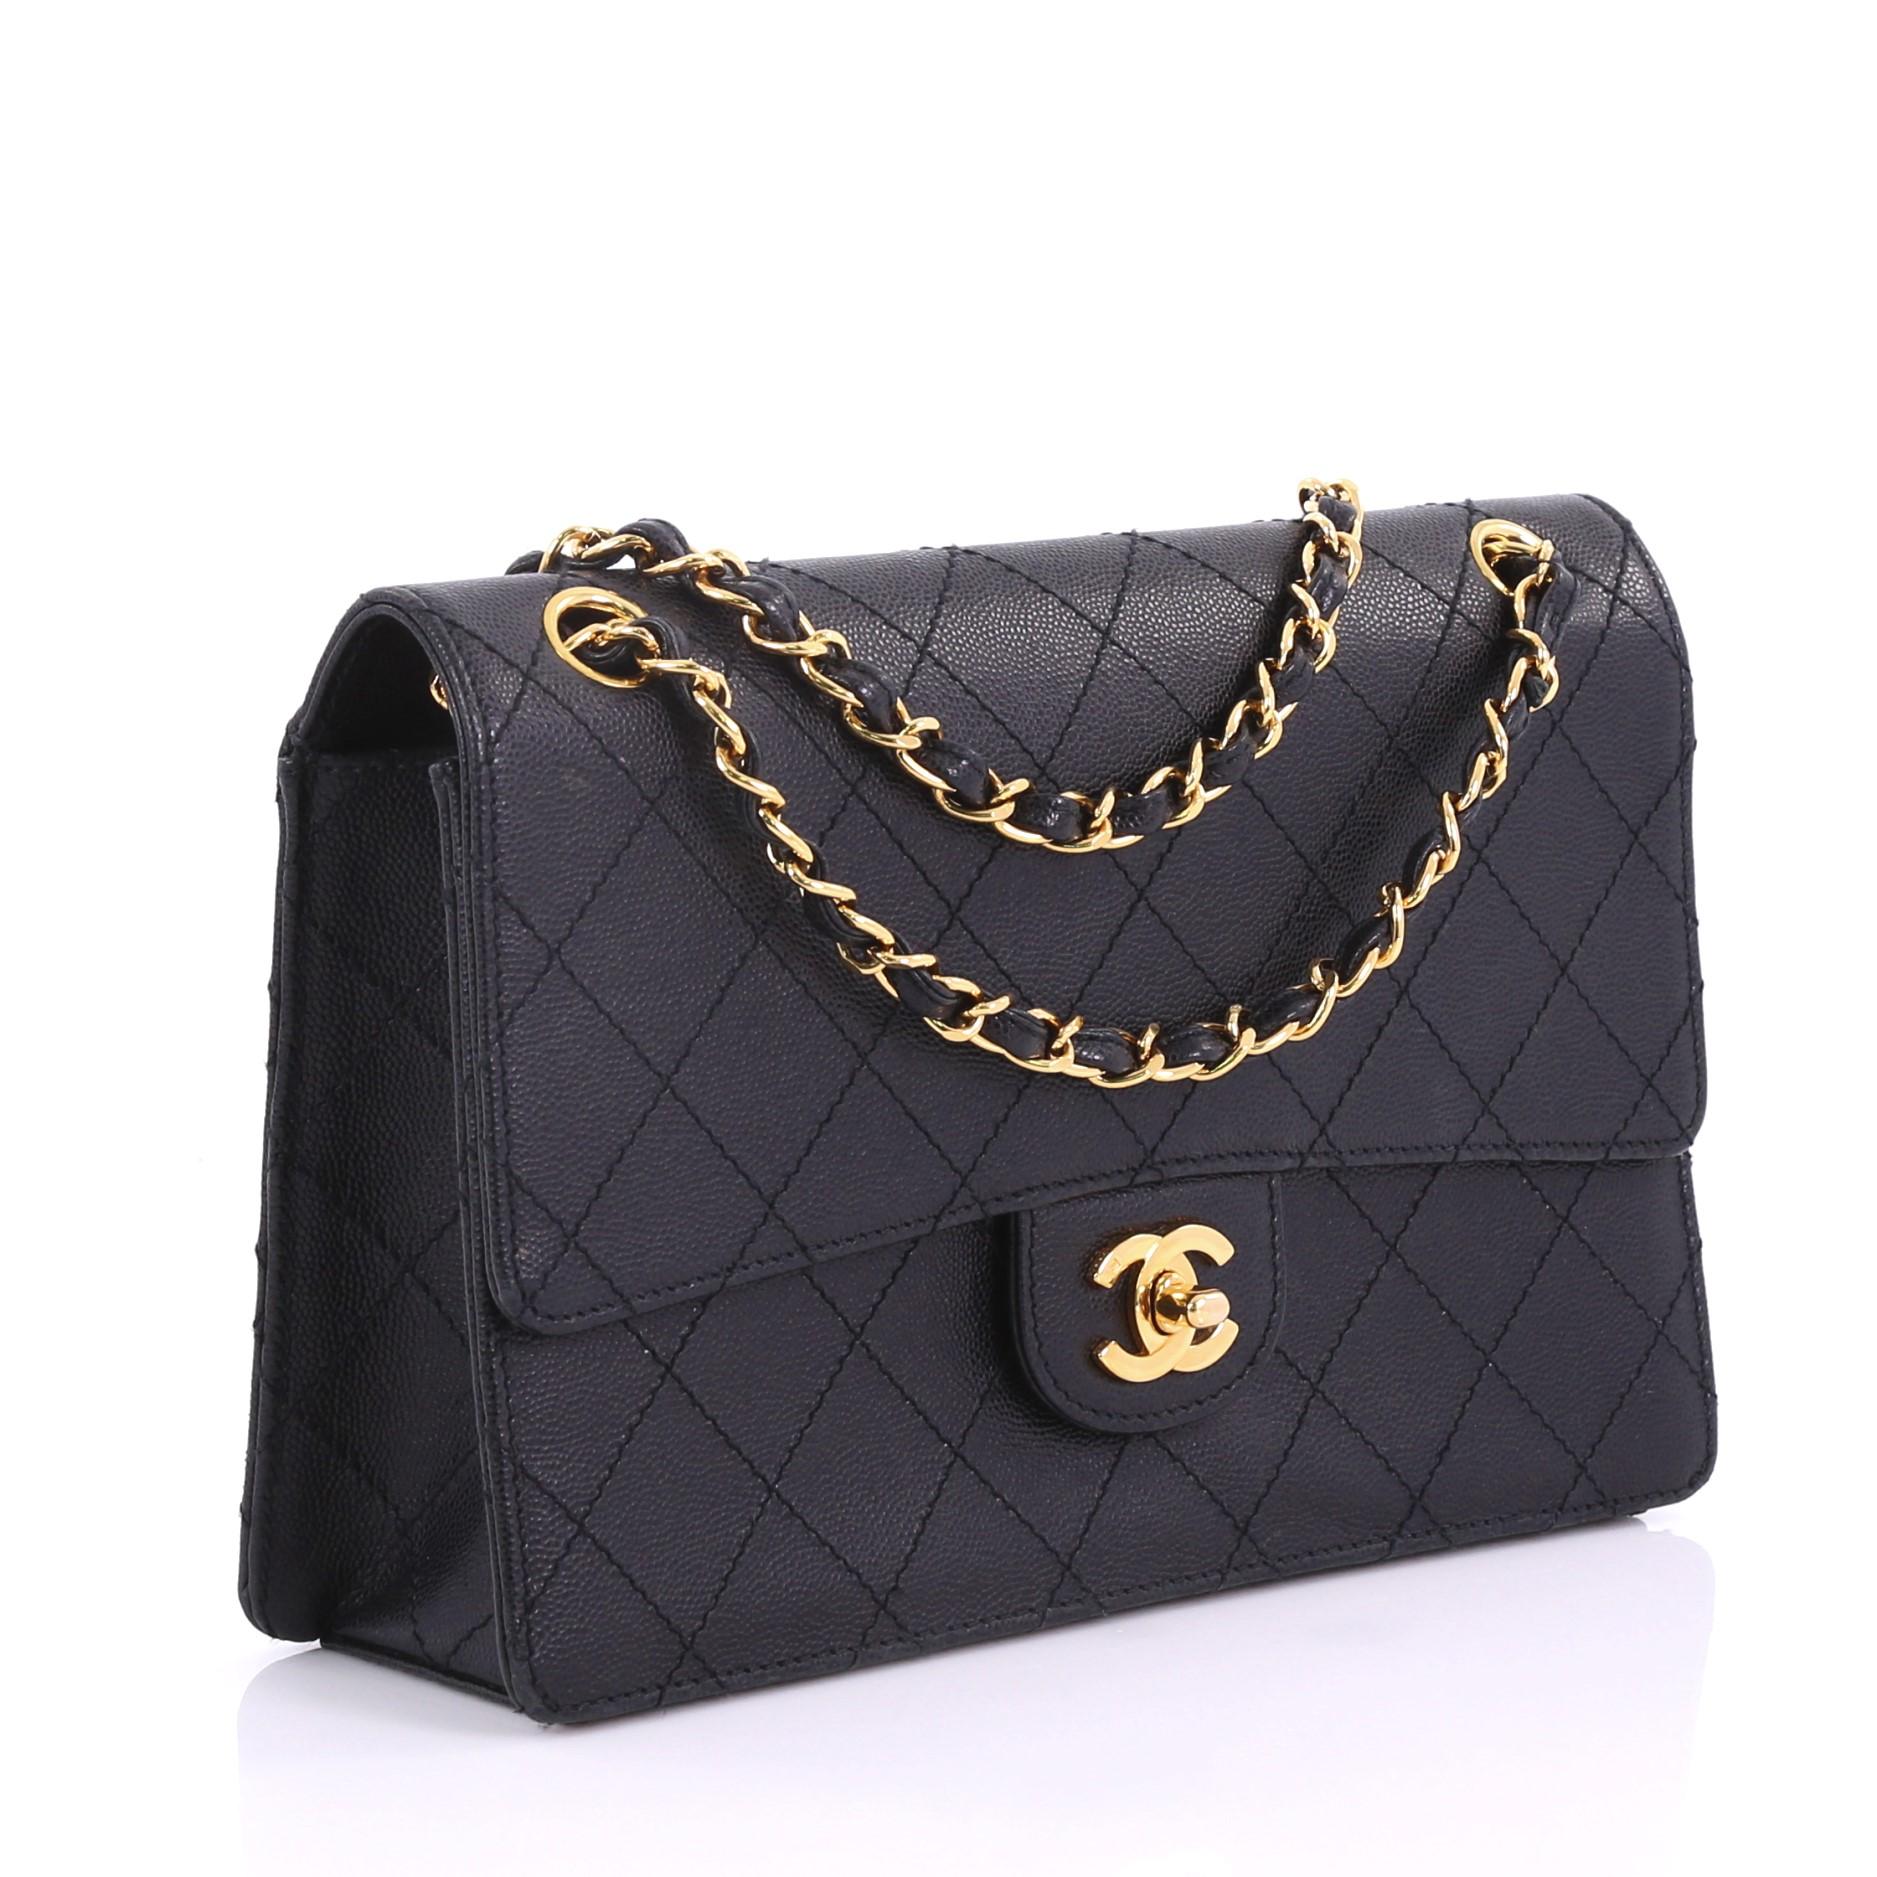 Black Chanel Vintage Chain Flap Shoulder Bag Quilted Caviar Small